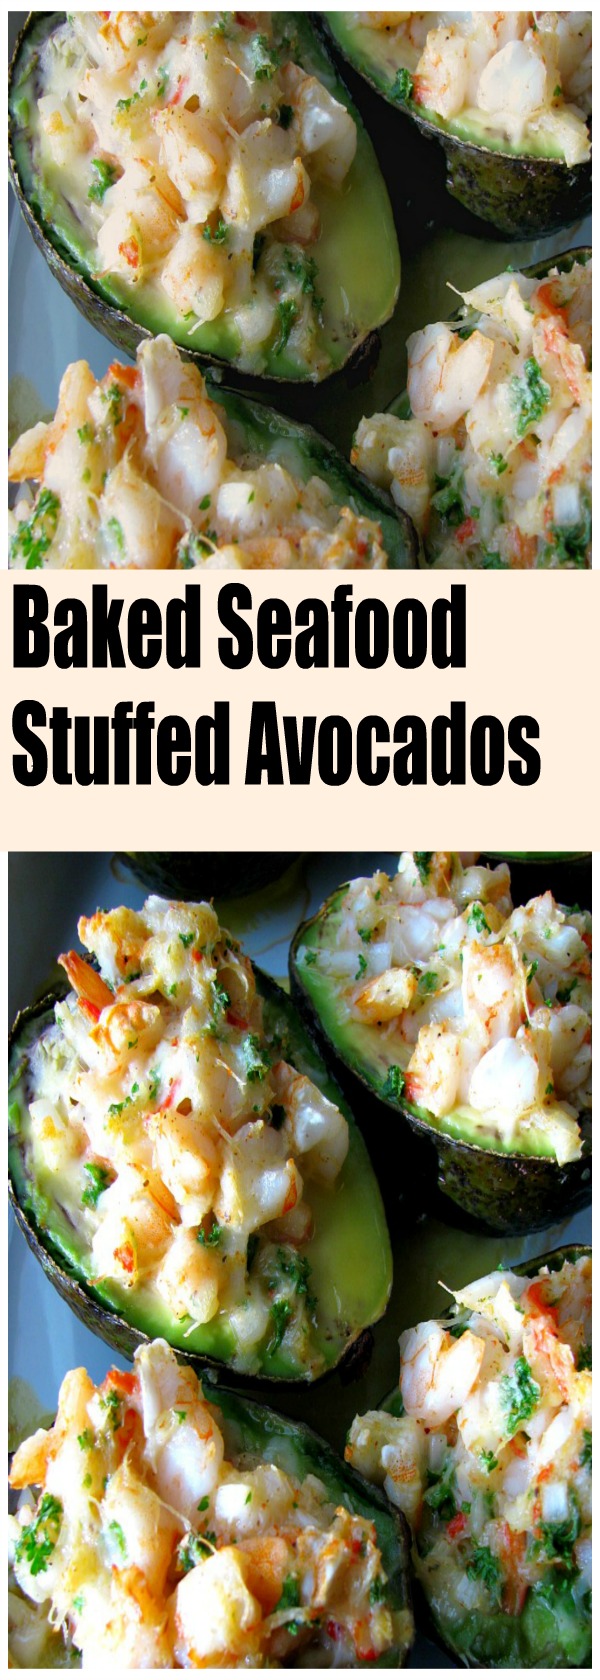 Crab and shrimp filled Baked Seafood Stuffed Avocados make an extraordinary Sunday or special occasion brunch entree, or appetizer before a special meal.